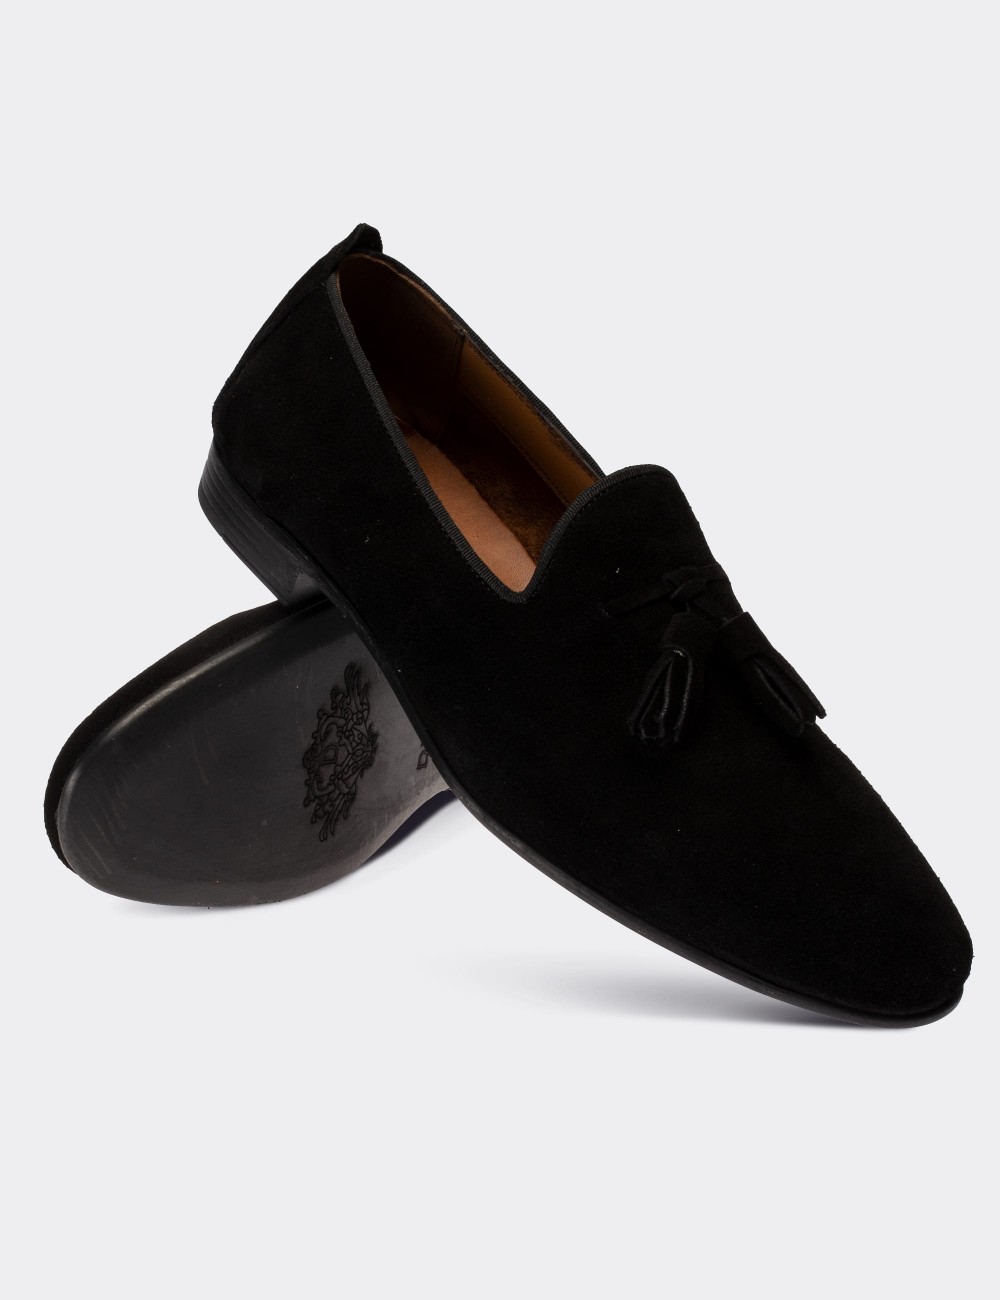 Black Suede Leather Loafers - 01702MSYHC07